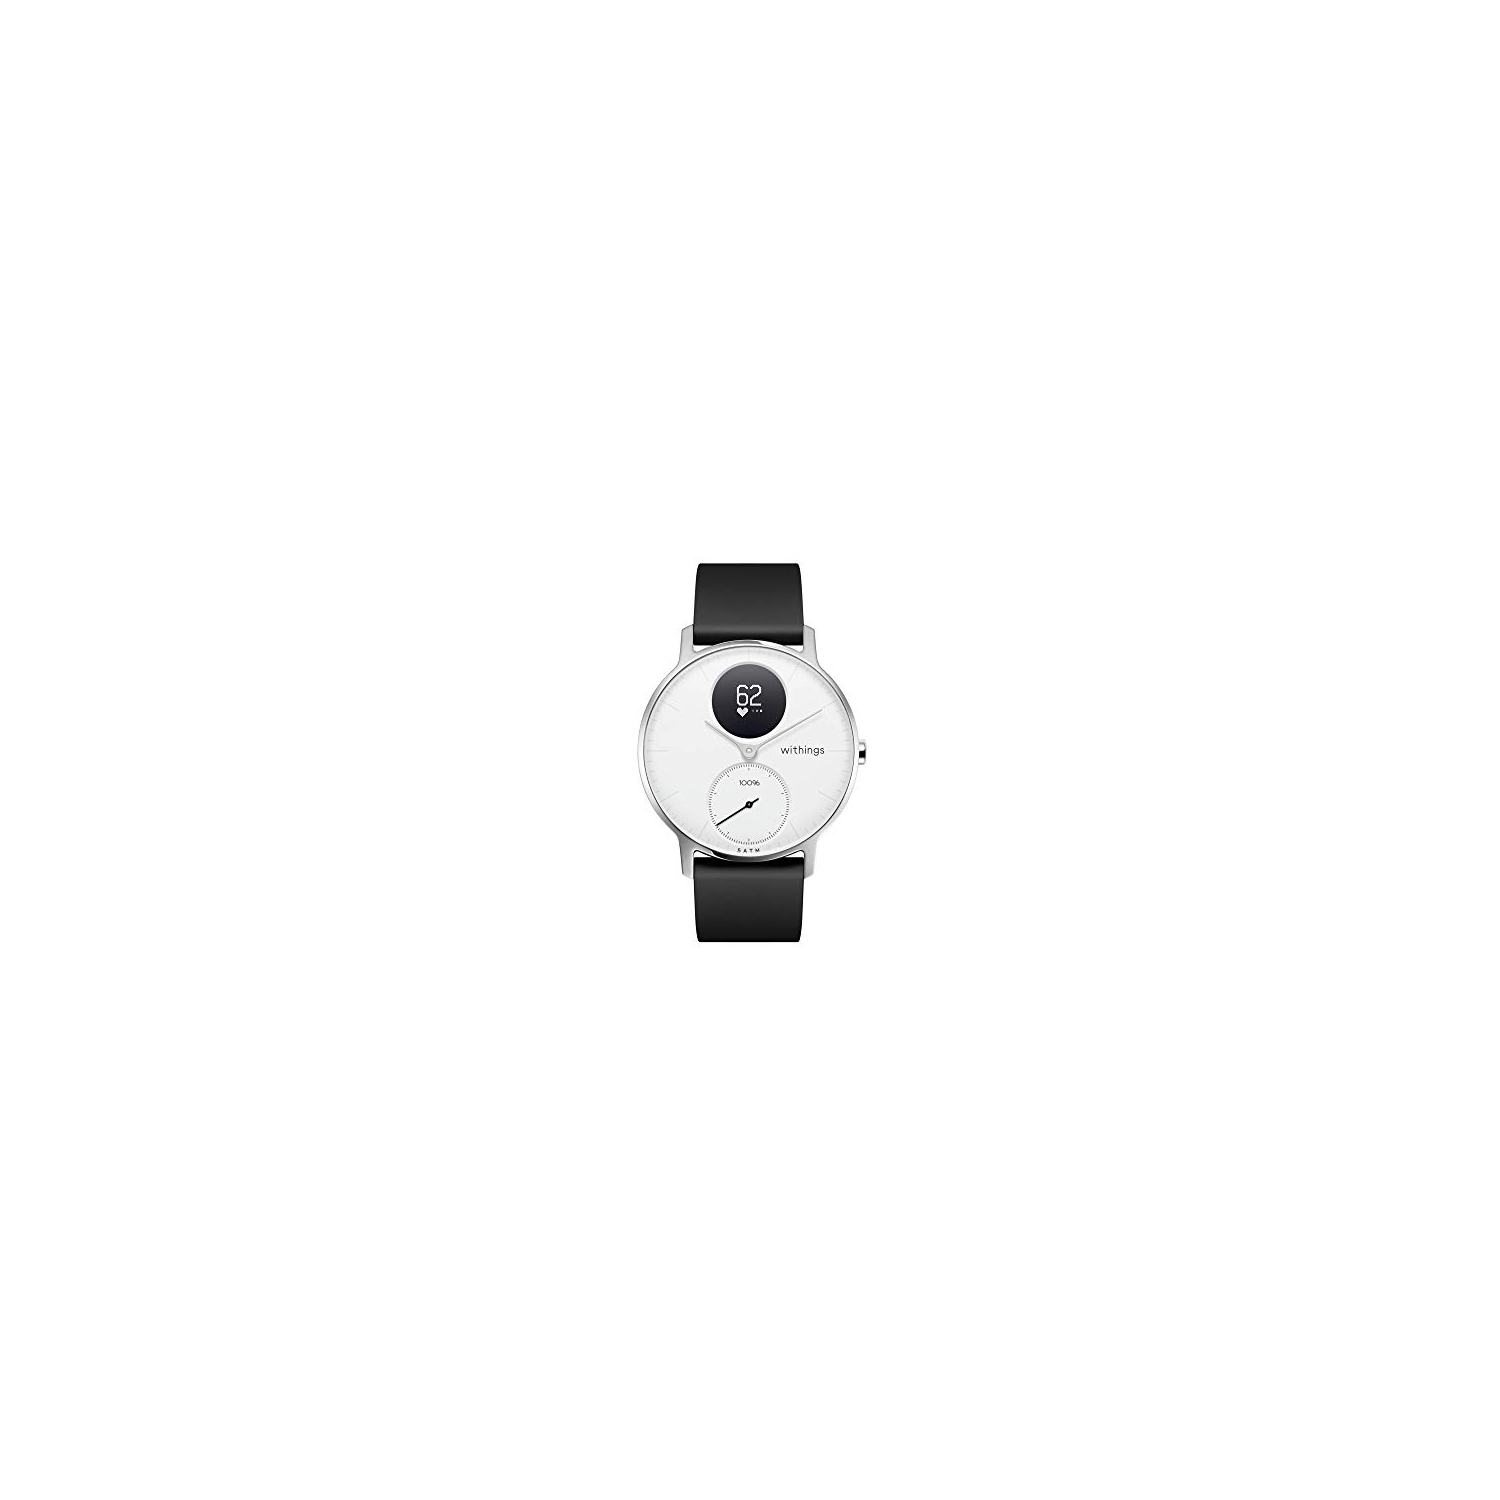 Nokia Steel HR Hybrid Smartwatch Heart Rate & Activity Tracking Watch, White, 36mm, up to 25 Days Long-Lasting Battery